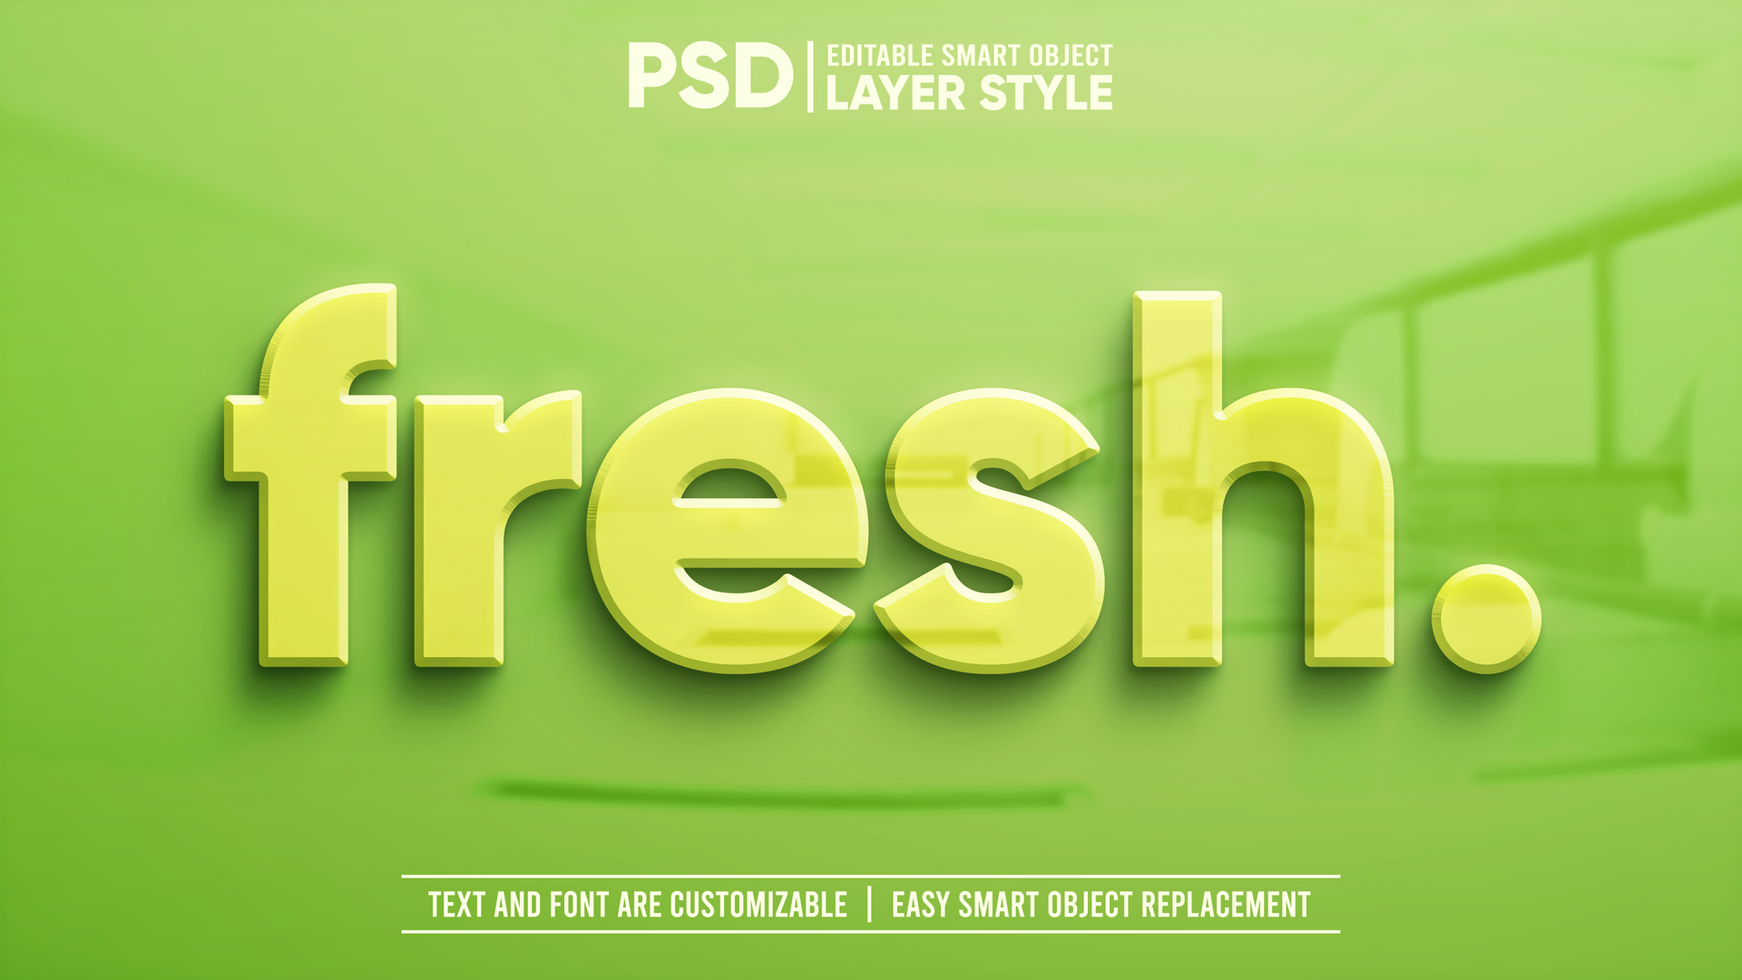 Clean Green Fresh Text with Reflection on Granite 3D Editable Layer Style Smart Object Text Effect psd